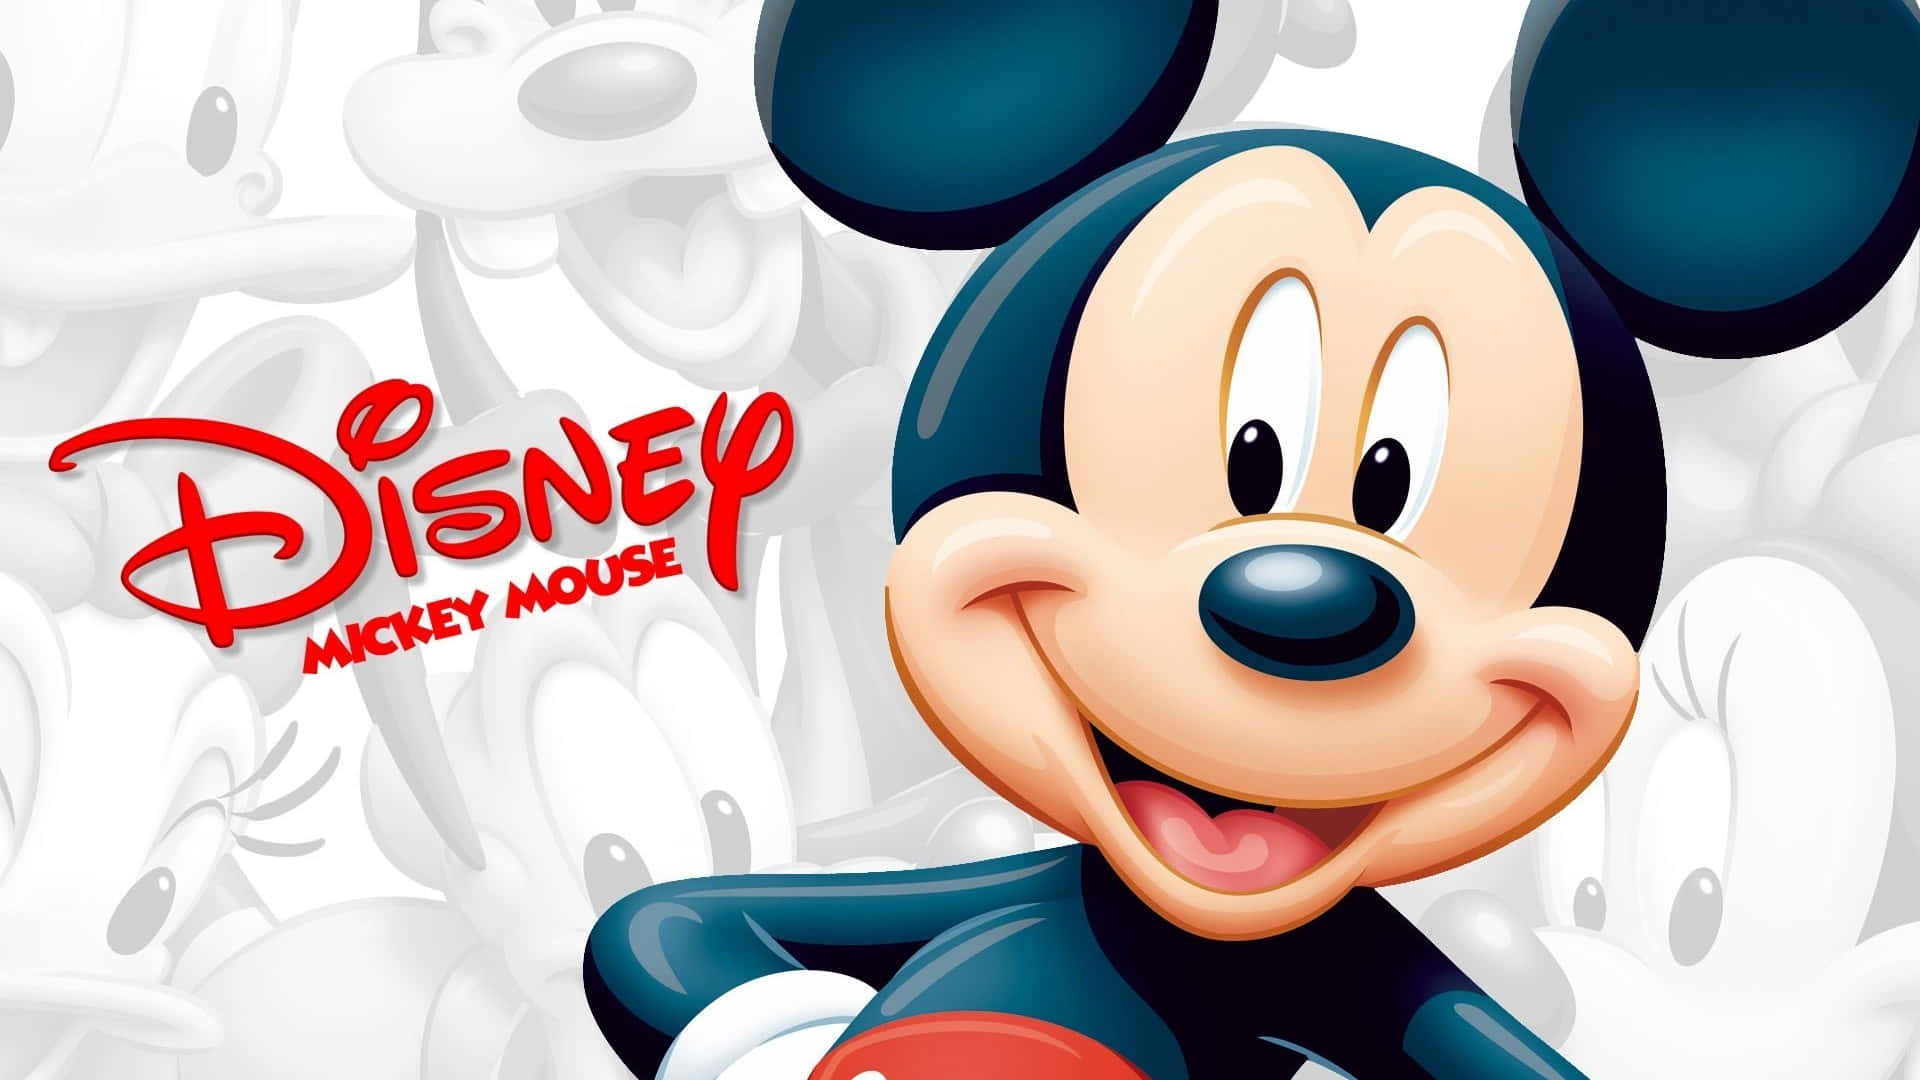 Enjoy the magic anytime, anywhere with Disney+ on Mac Wallpaper